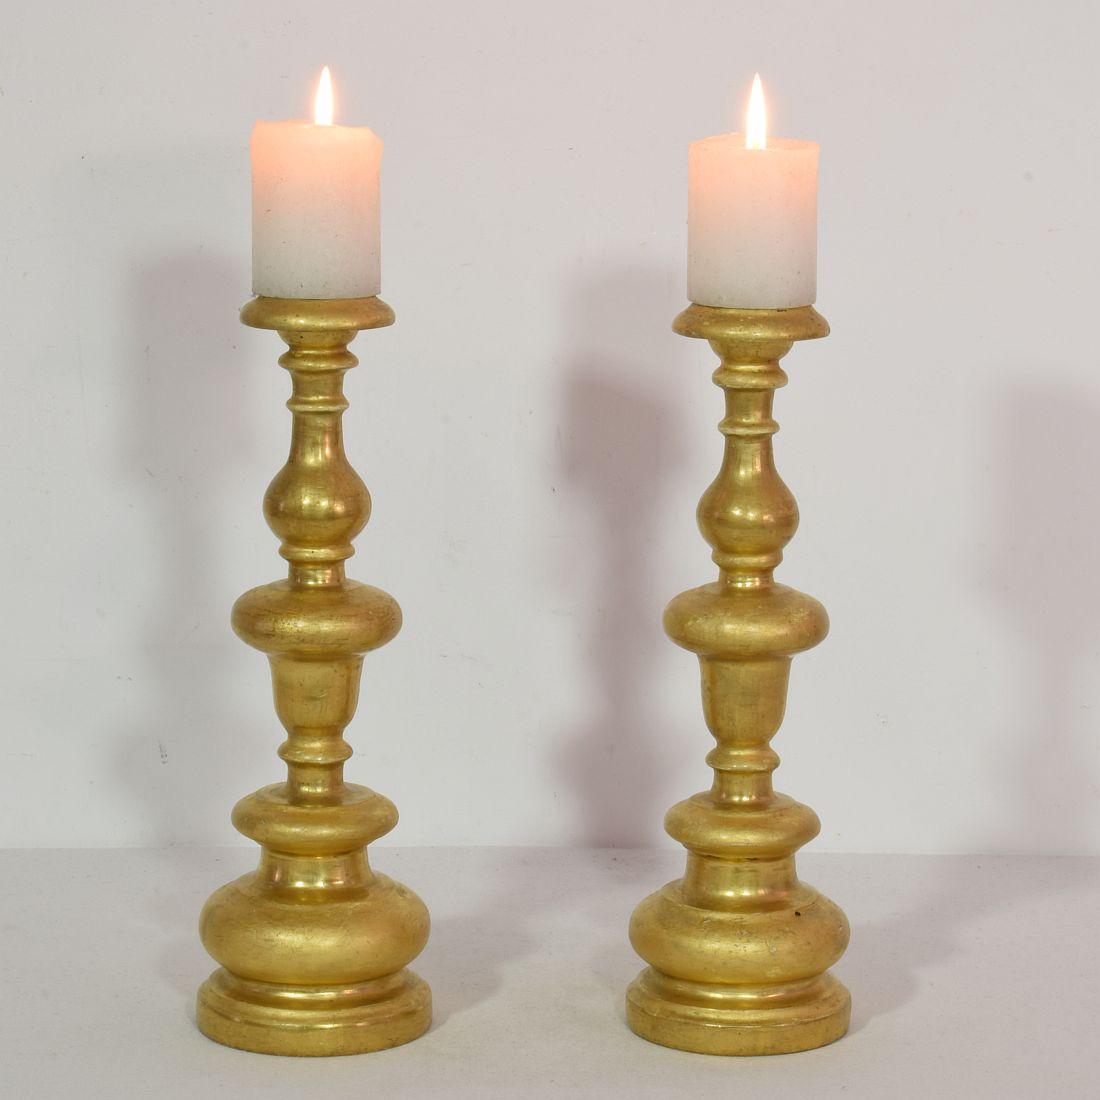 Beautiful pair of Baroque giltwood candleholders.
Unique and original period pieces, Italy, circa 1750.
good condition. Measurements include the hand forged iron peak.